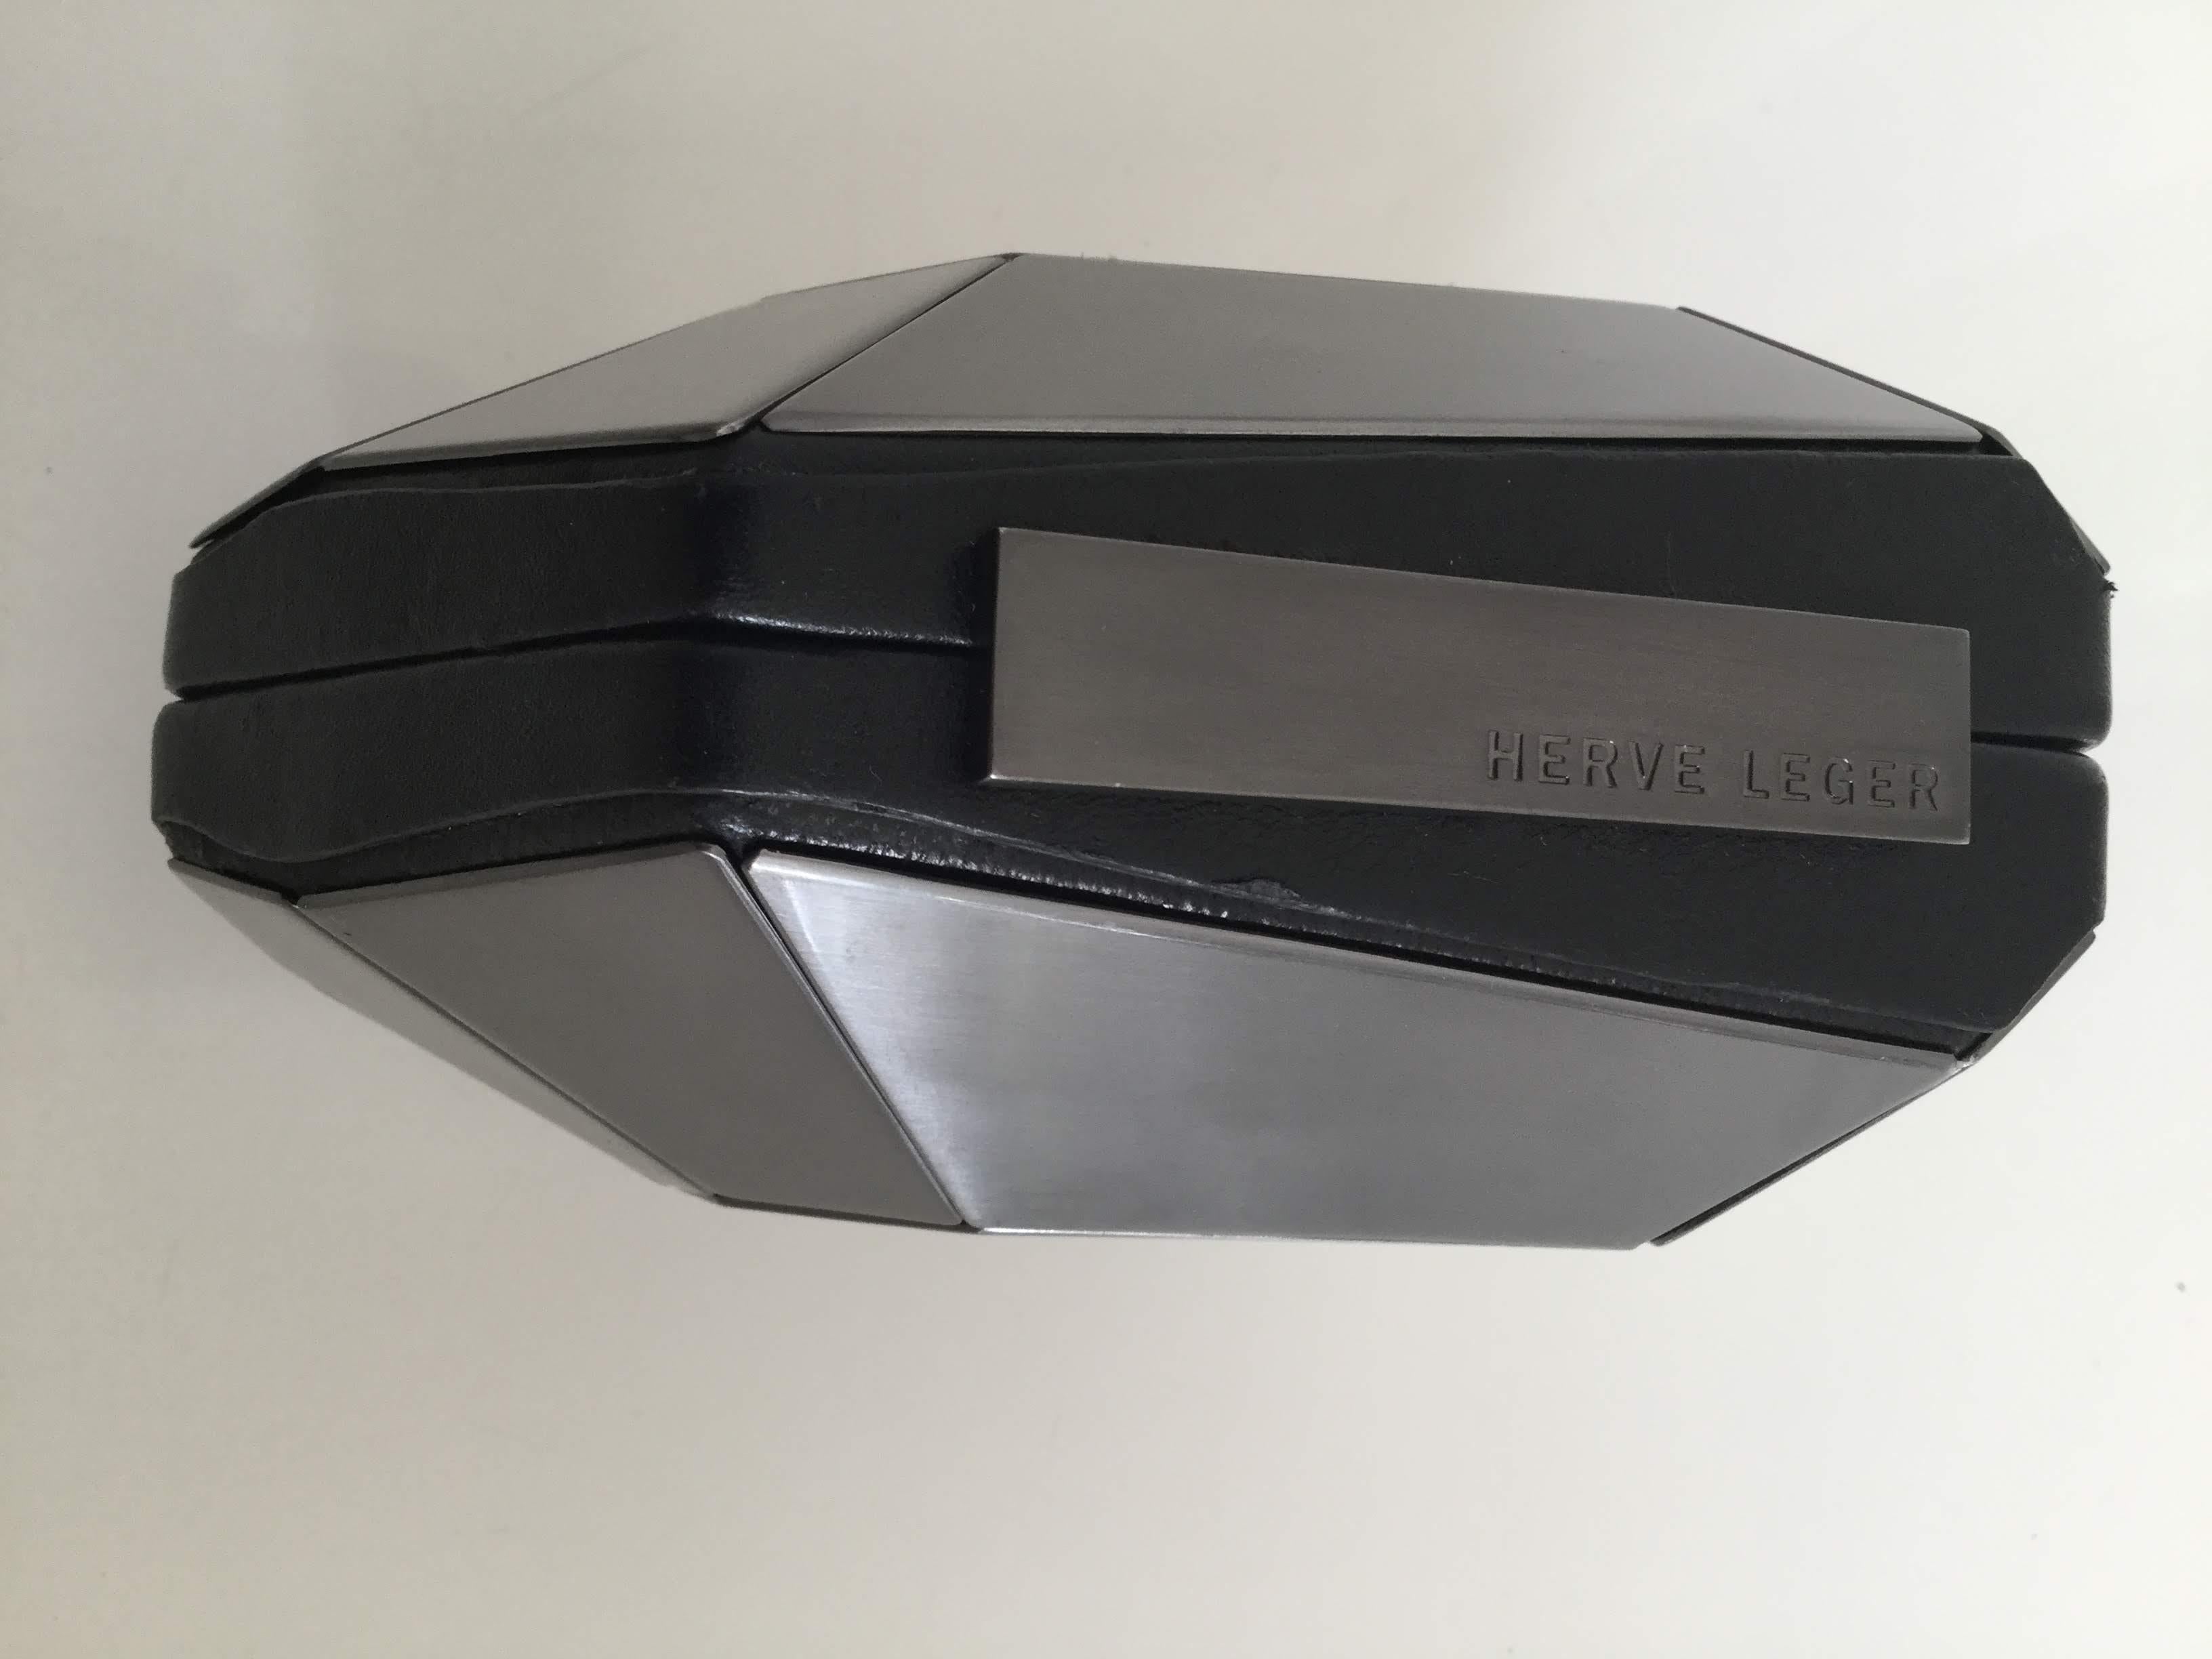 Hervé Leger Rare Multifaceted Minaudière Metallic Grey Metal and Leather Clutch For Sale 1